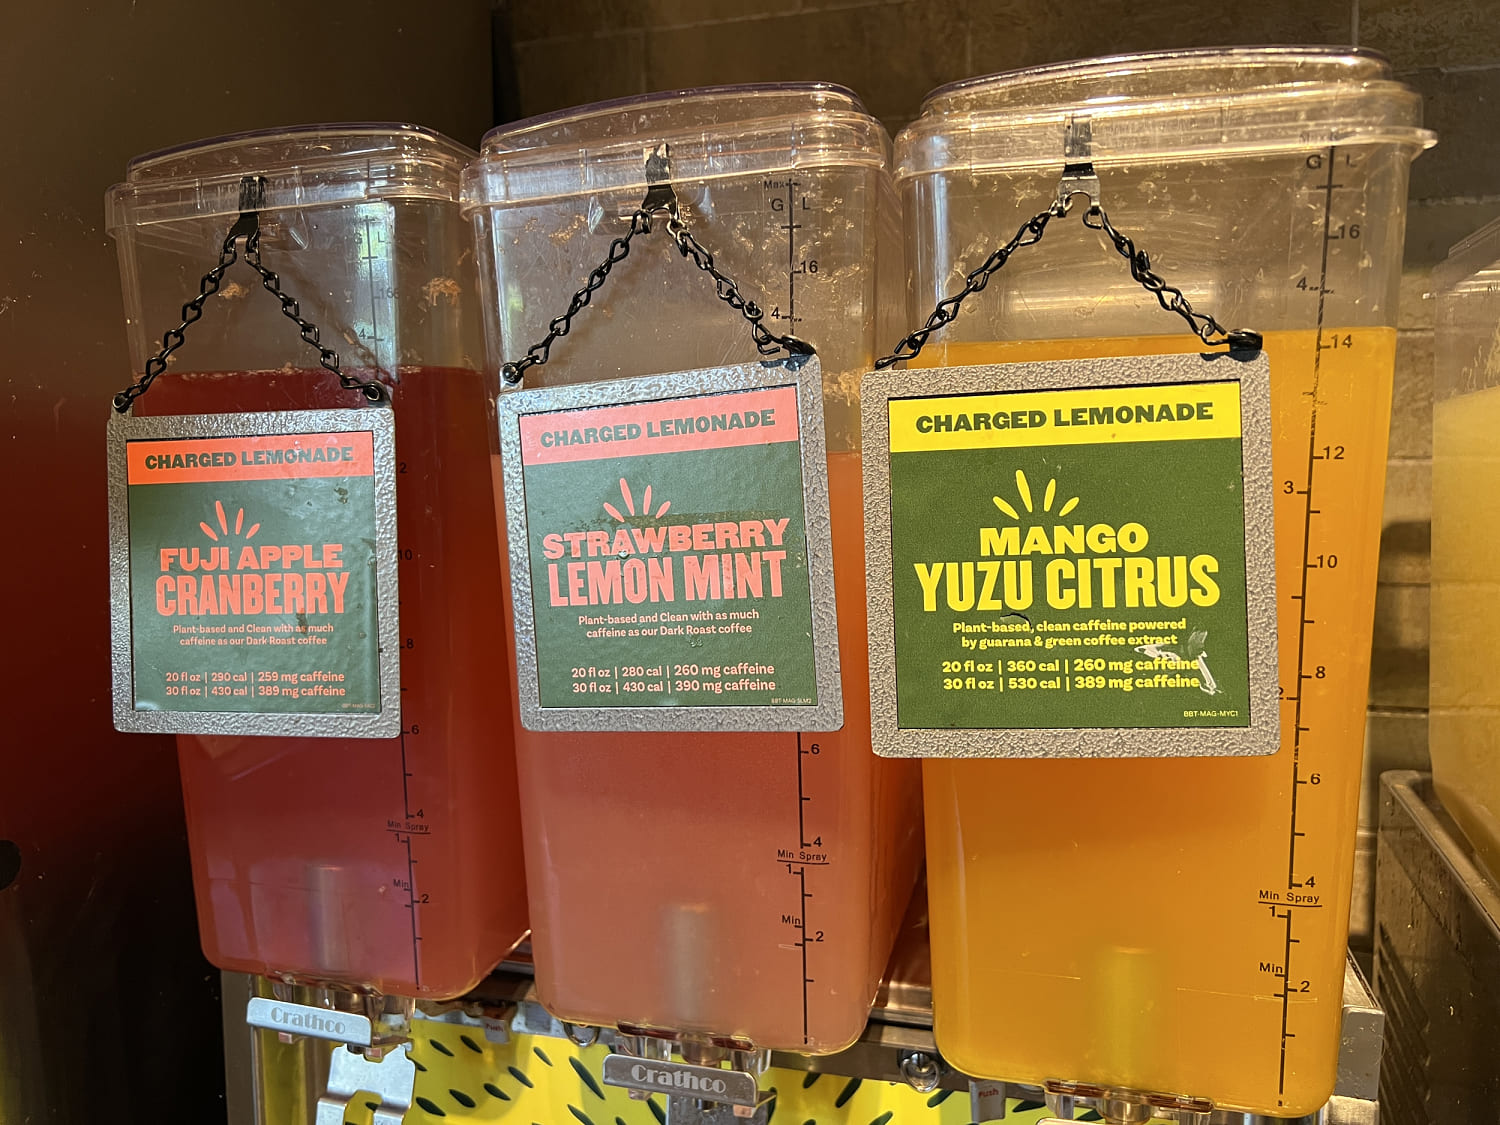 Panera says it's phasing out its controversial Charged Lemonade nationwide